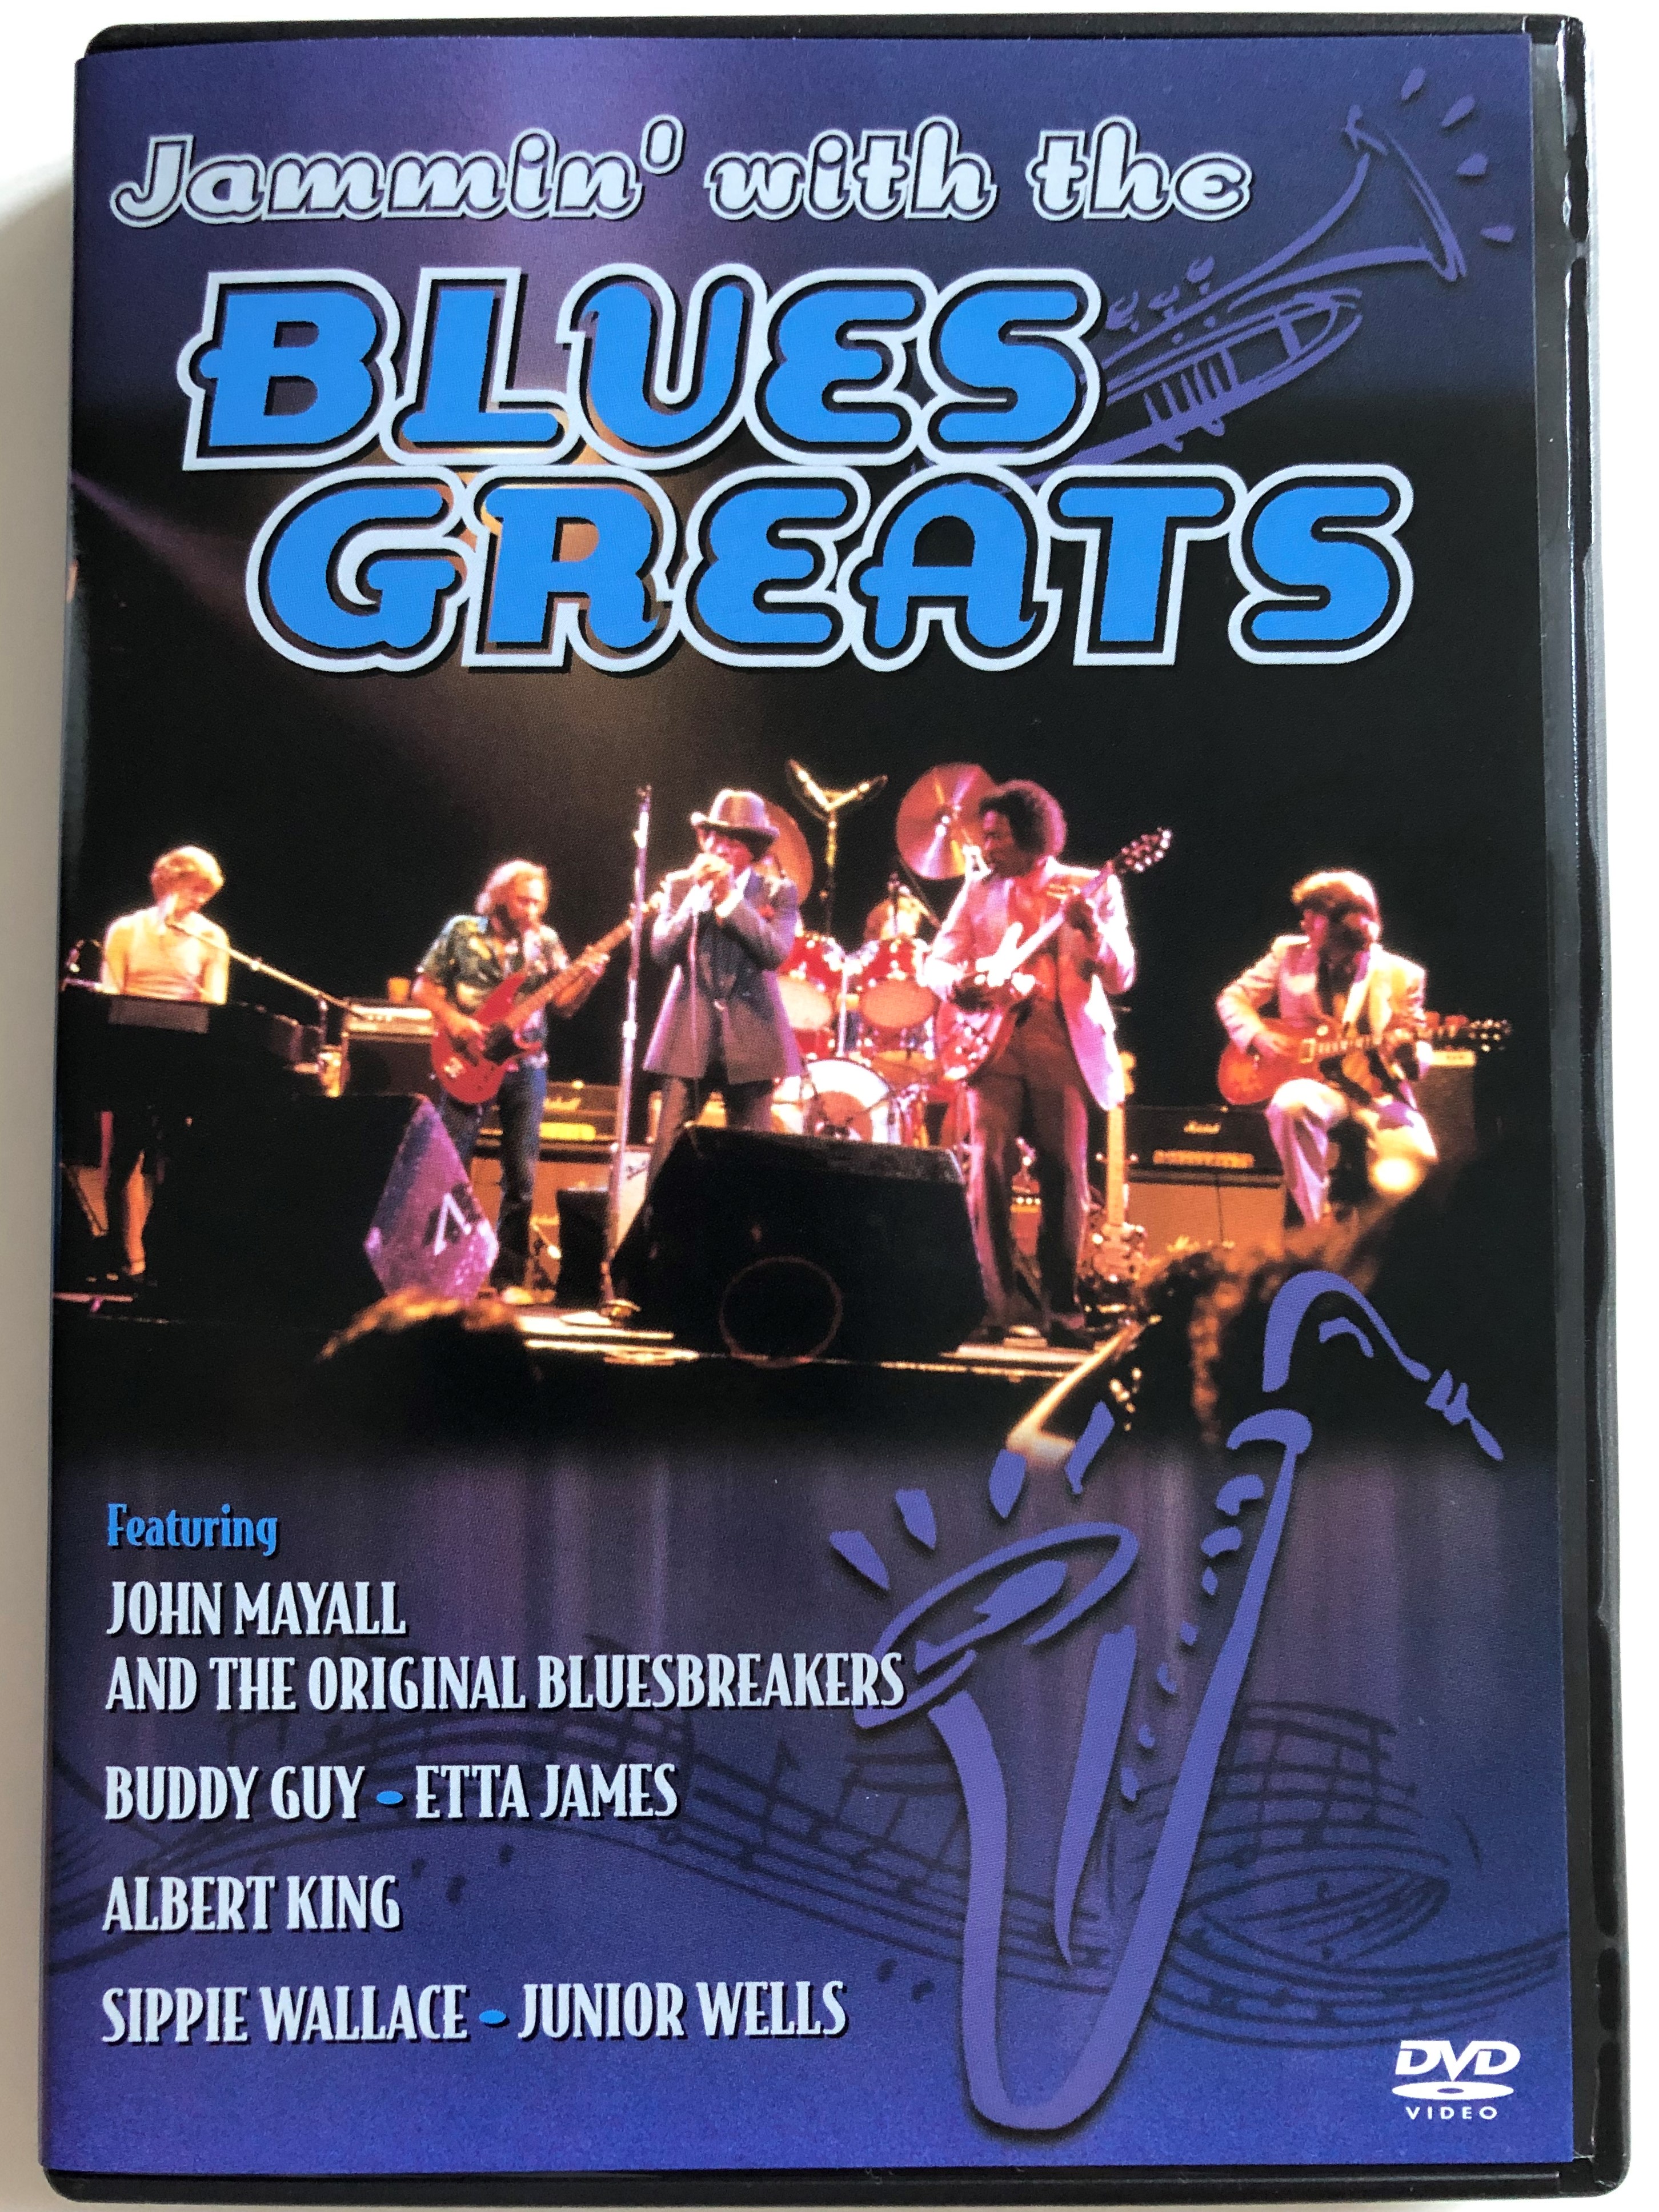 jammin-with-the-blues-greats-dvd-1994-featuring-john-mayall-and-the-original-bluesbreakers-buddy-guy-etta-james-albert-king-sippie-wallace-junior-wells-1-.jpg